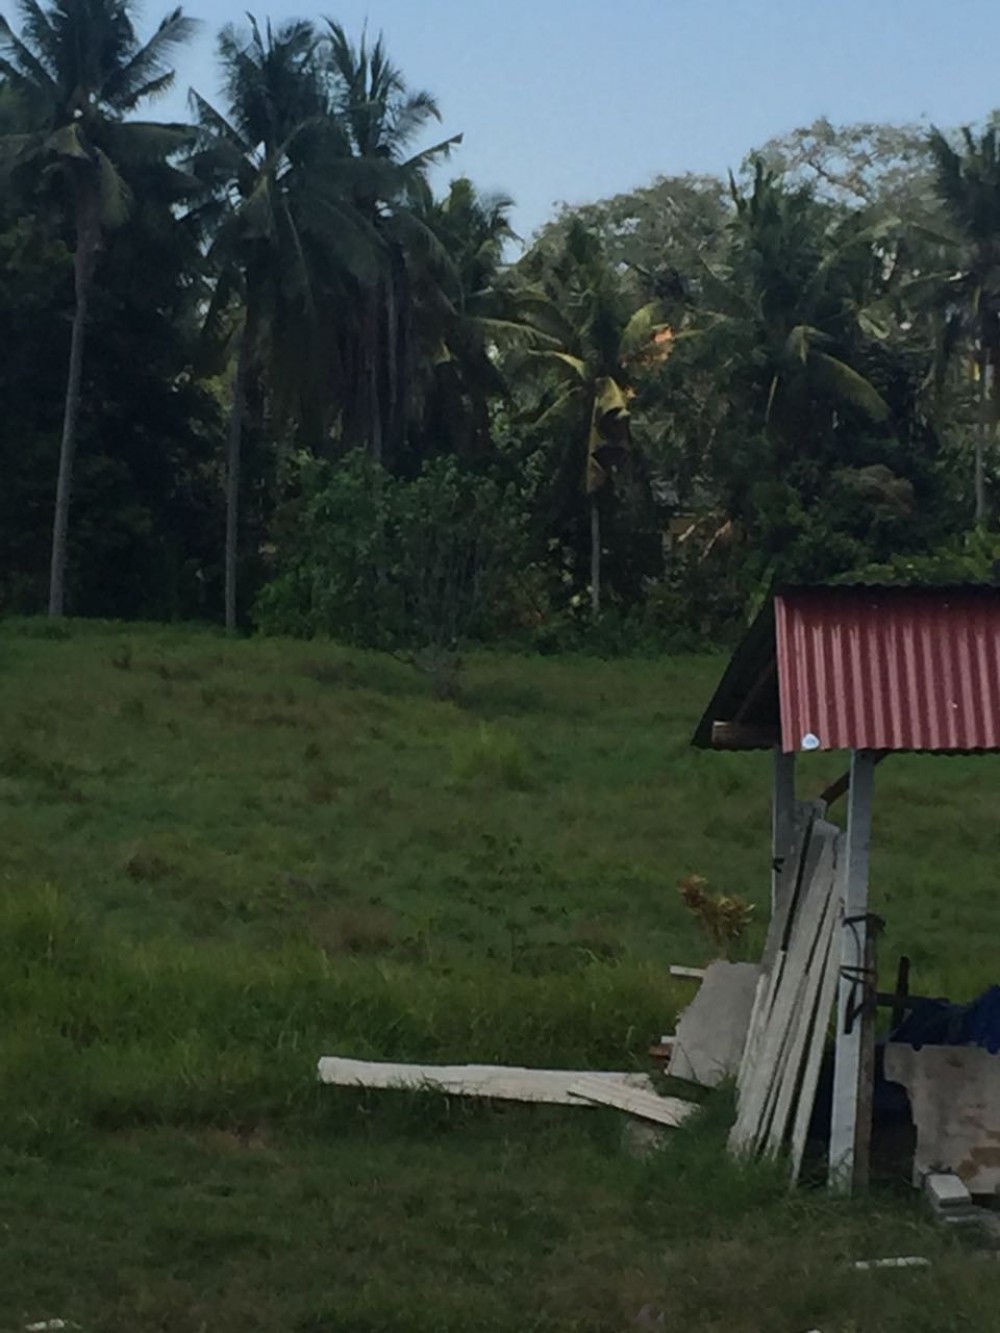 Strategic land for sale and the closes from ubud central